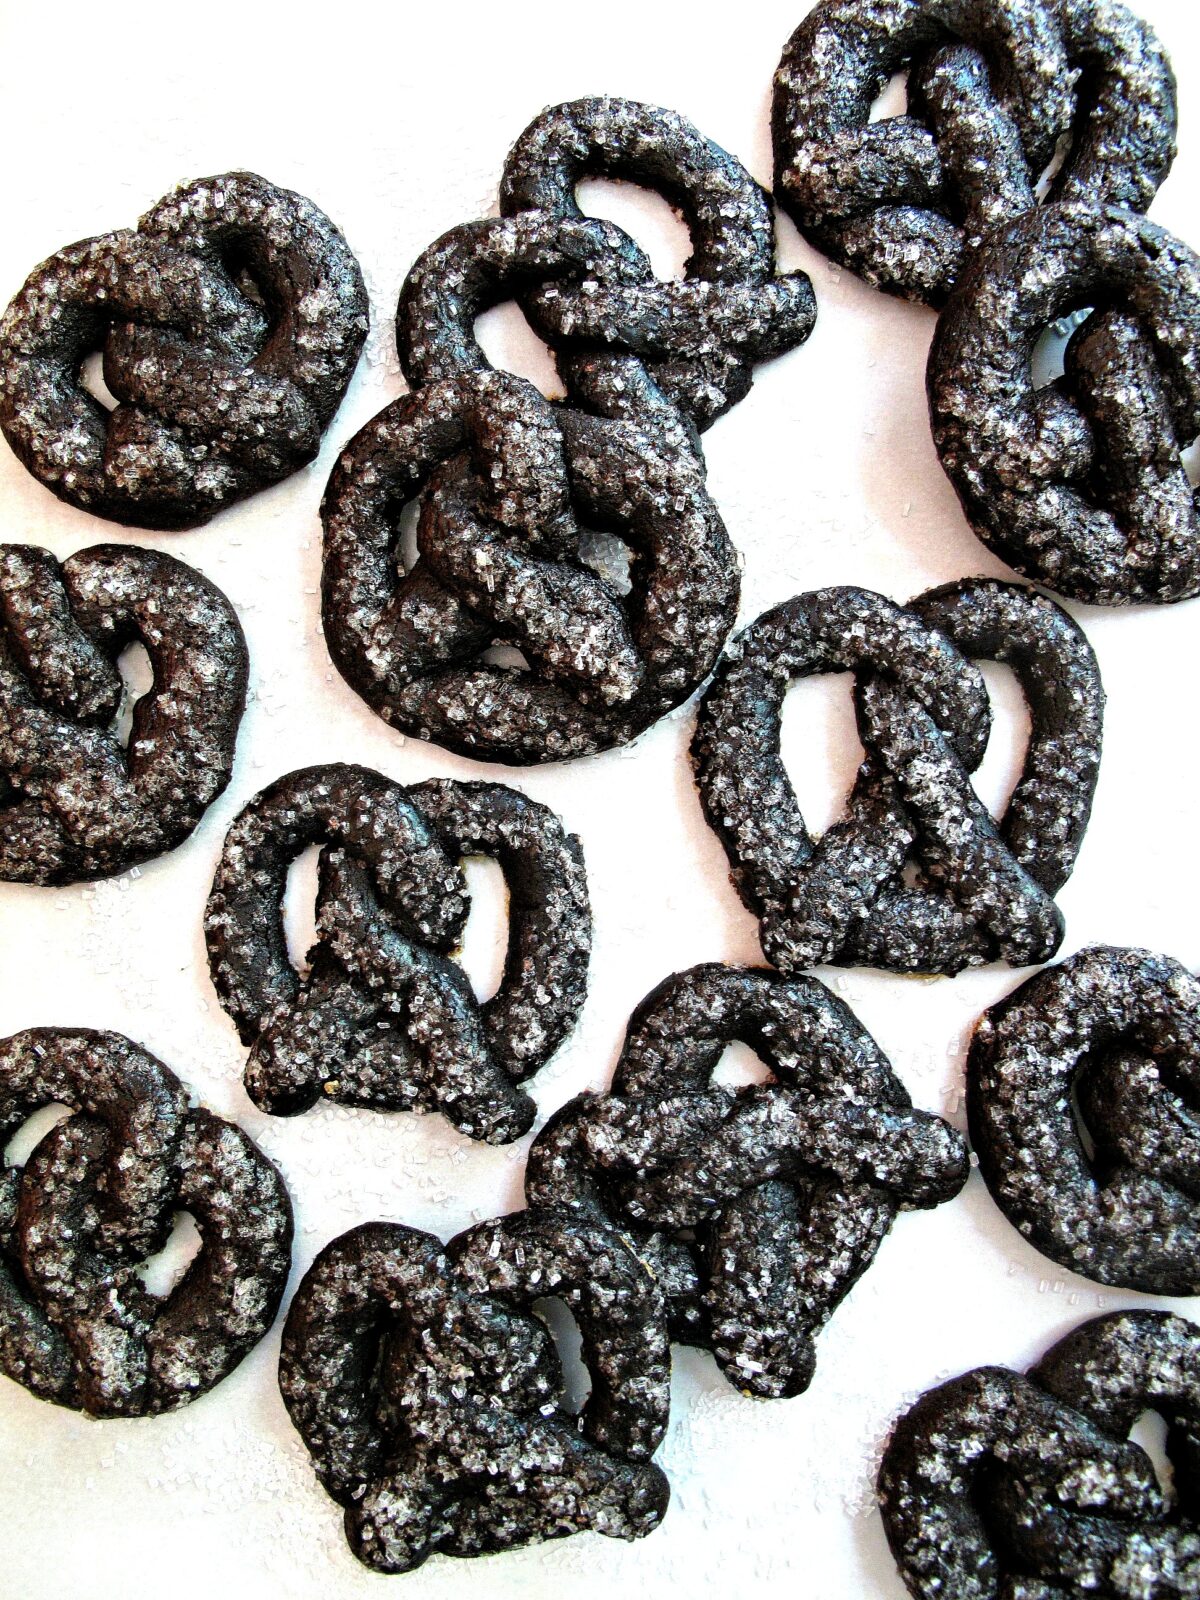 Chocolate Pretzel  shaped cookies coated in coarse sugar for crunch.